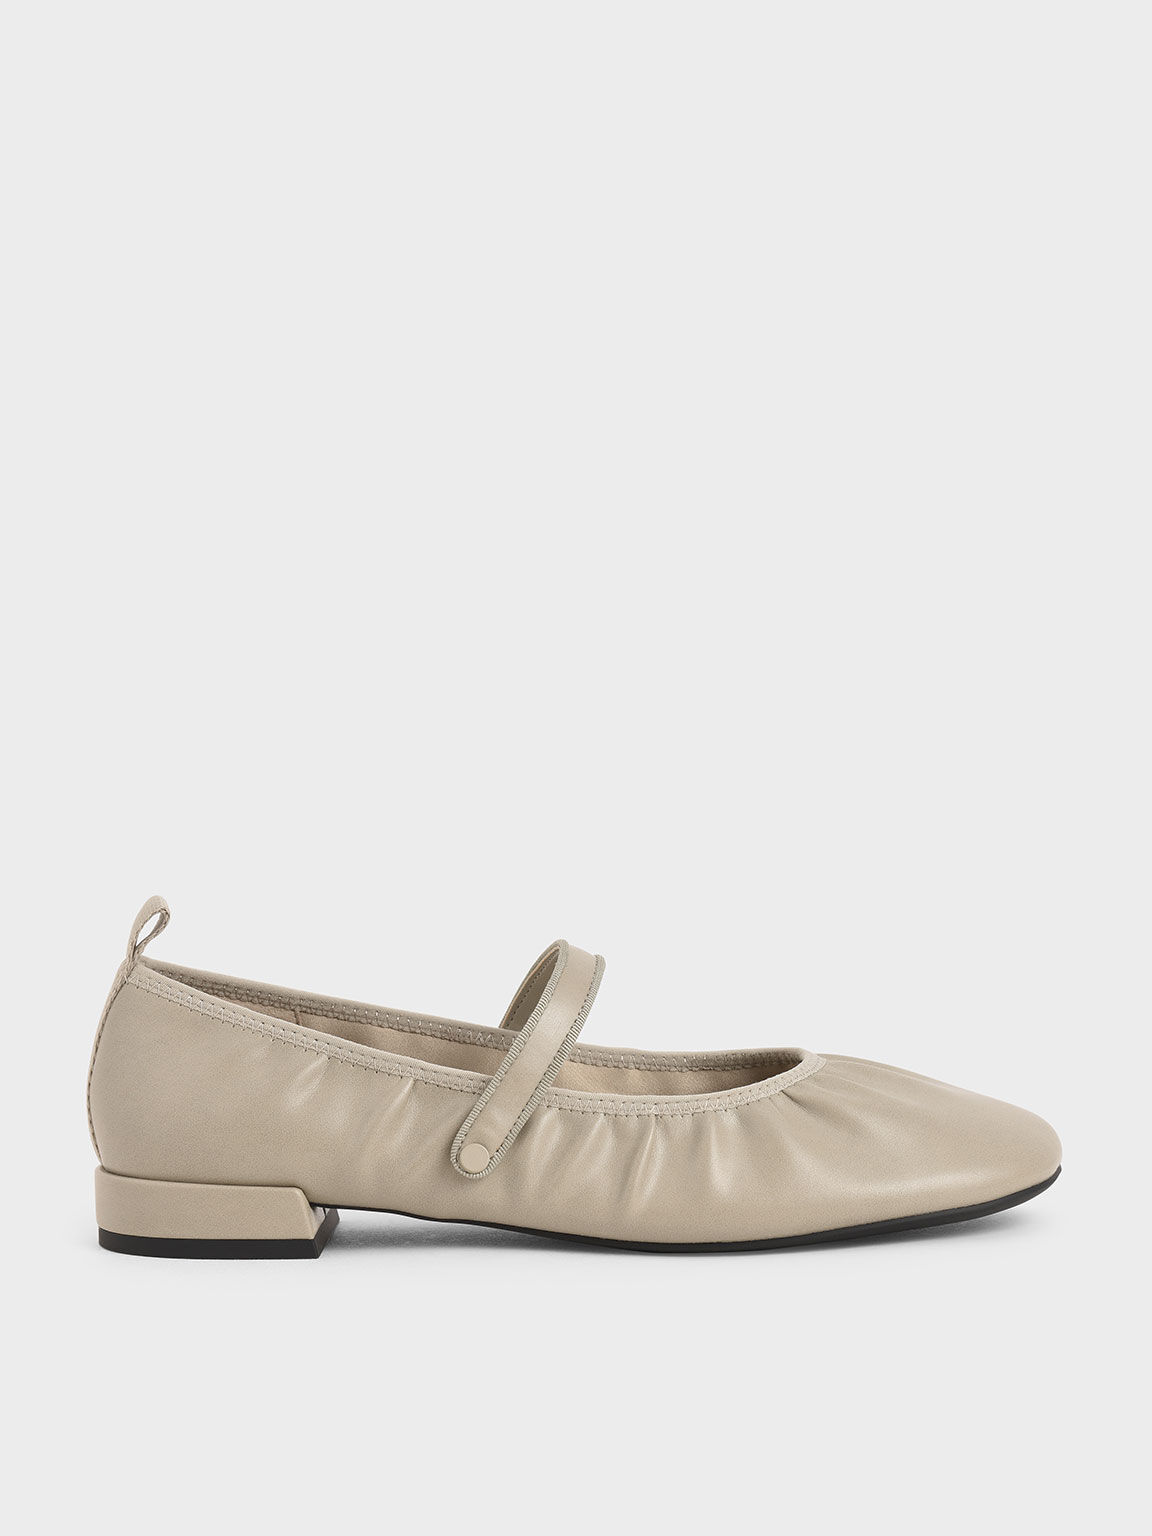 Mary Jane Flats, Taupe, hi-res